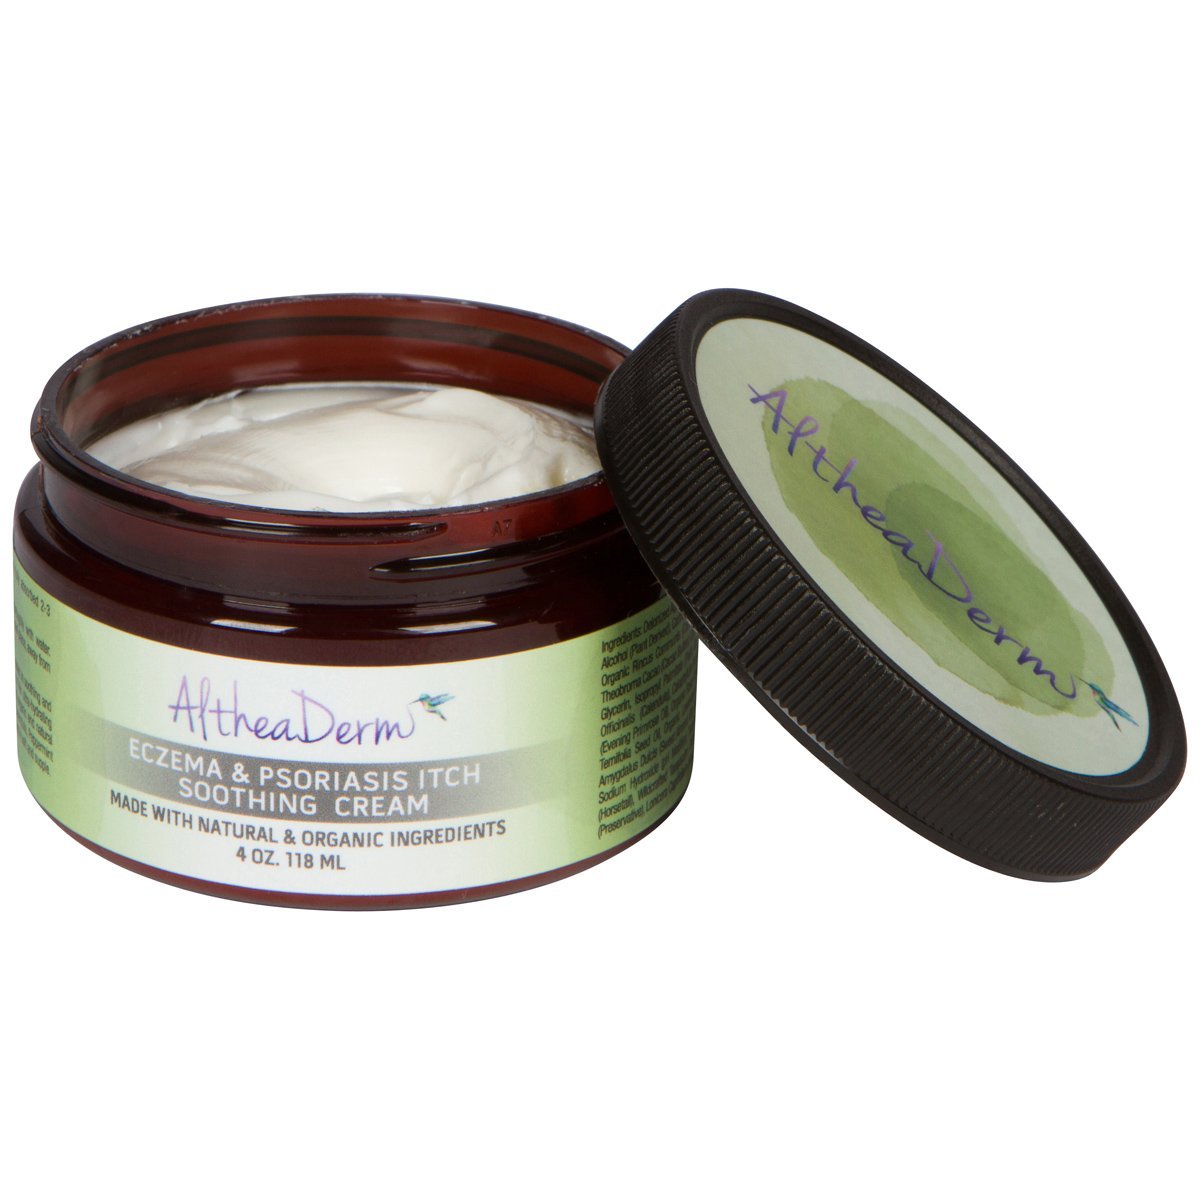 Eczema &  Psoriasis Itch Soothing Cream